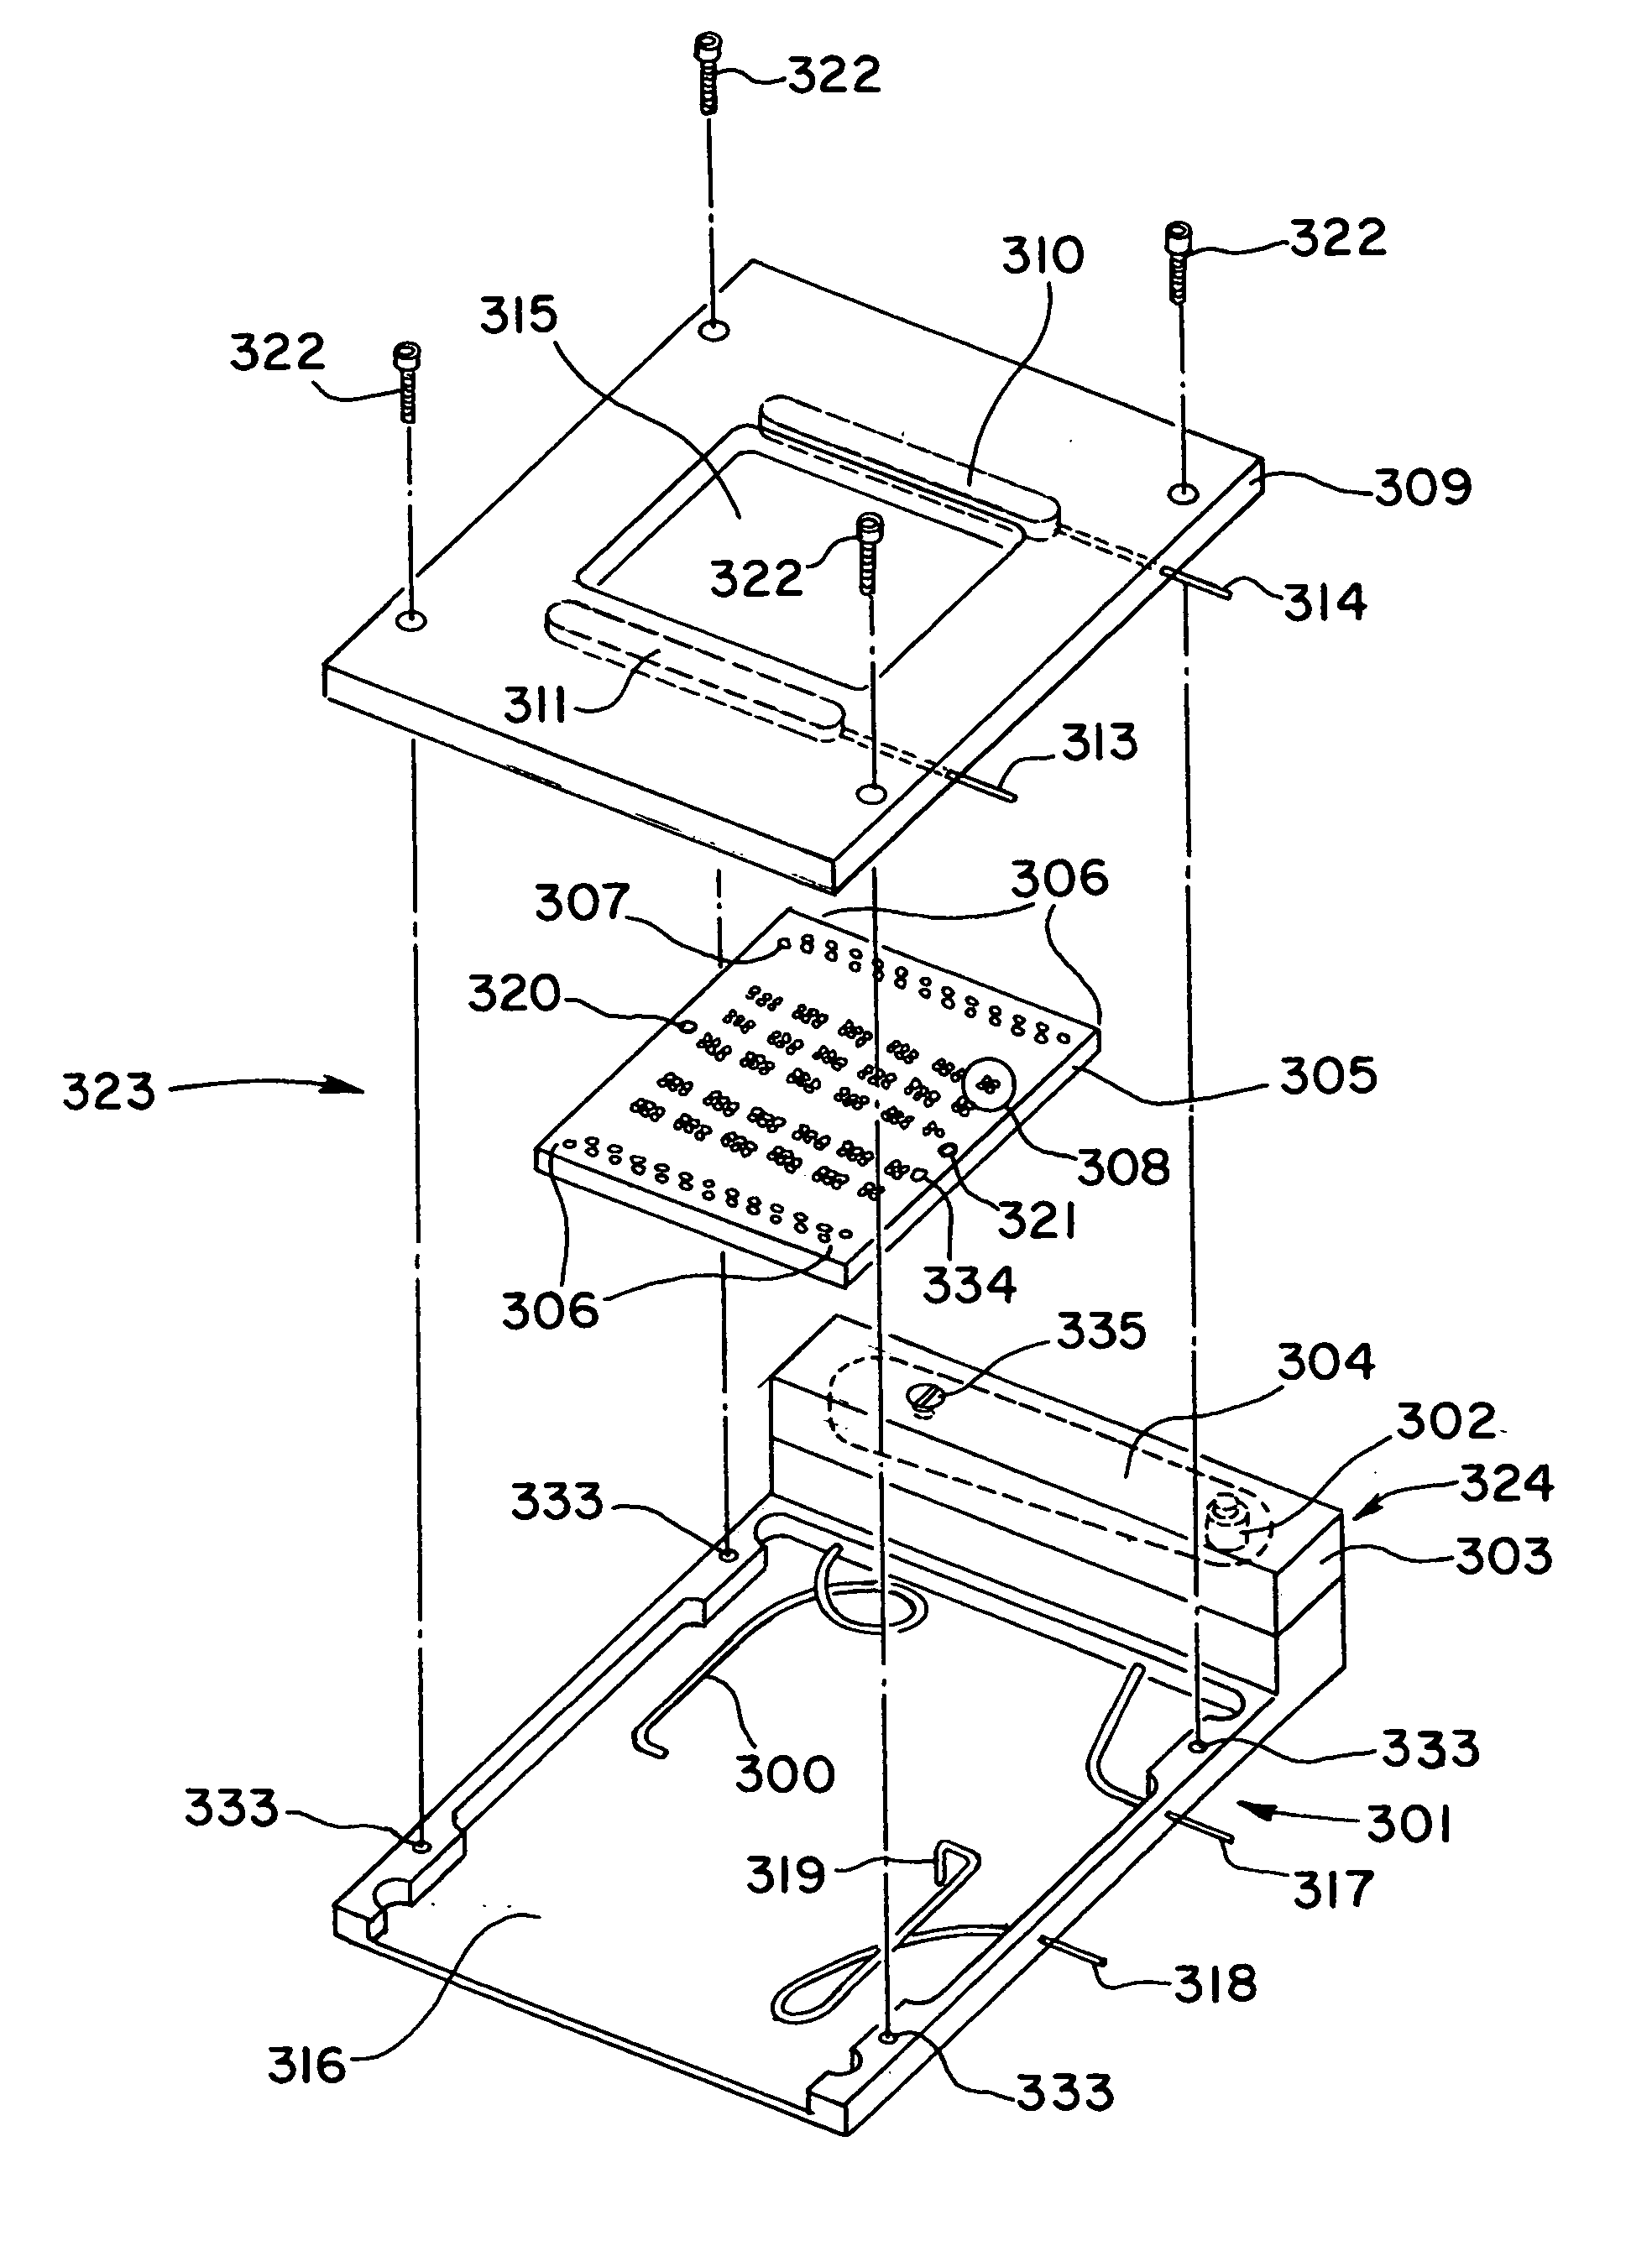 Crystal forming devices and systems and methods for using the same